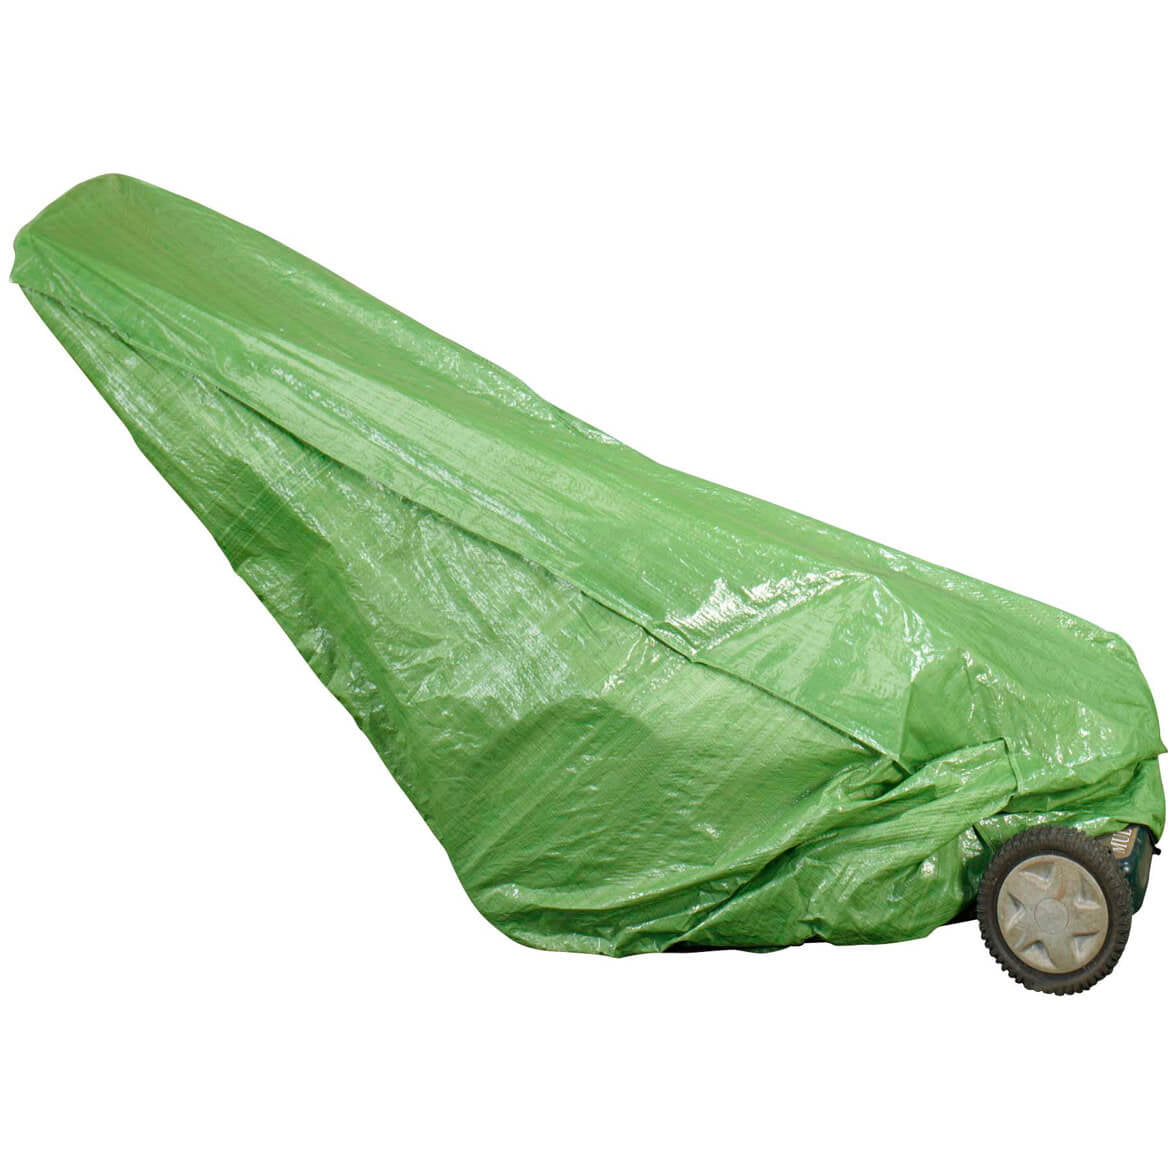 G326 Green 175 x 56 cm Bosmere Cover Up Rotary Line Cover